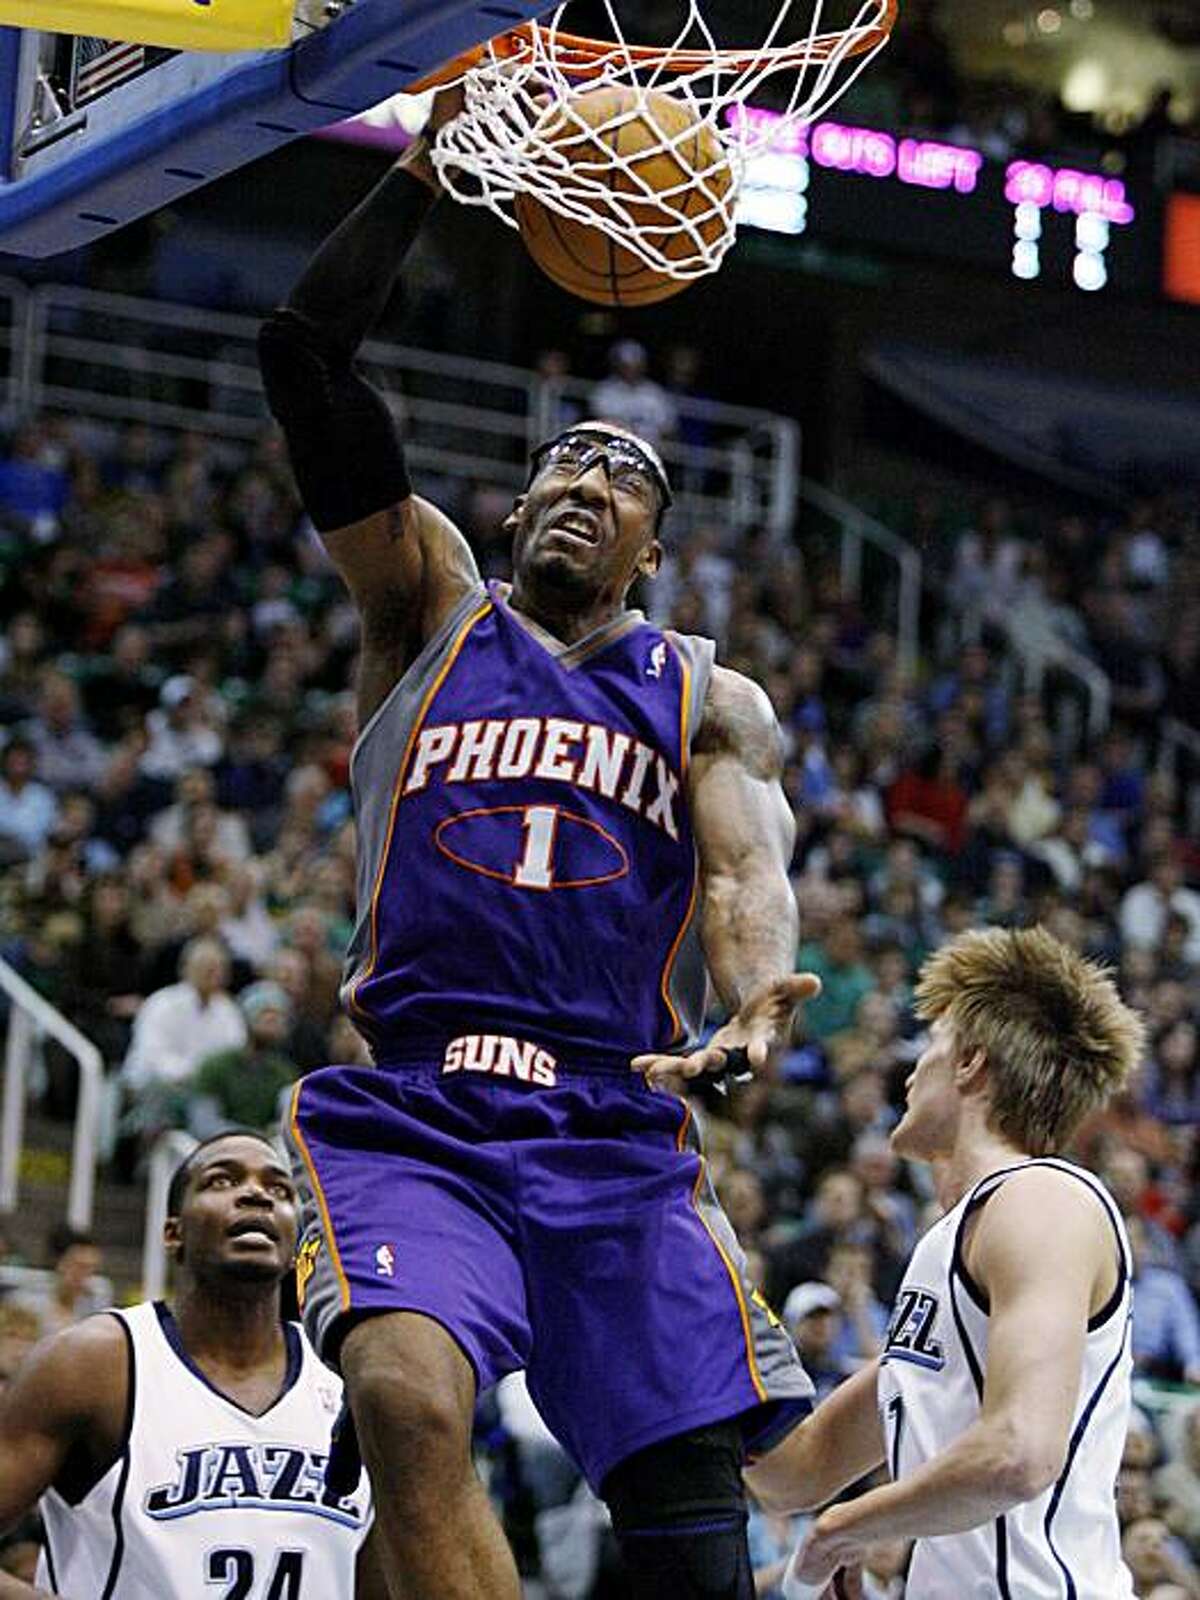 Phoenix Suns forward Amare Stoudemire (1) dunks as Utah Jazz's Paul Millsap (24) and Andrei Kirilenko (47), of Russia, look on during the first half of an NBA basketball game Monday, Jan. 25, 2010, in Salt Lake City.